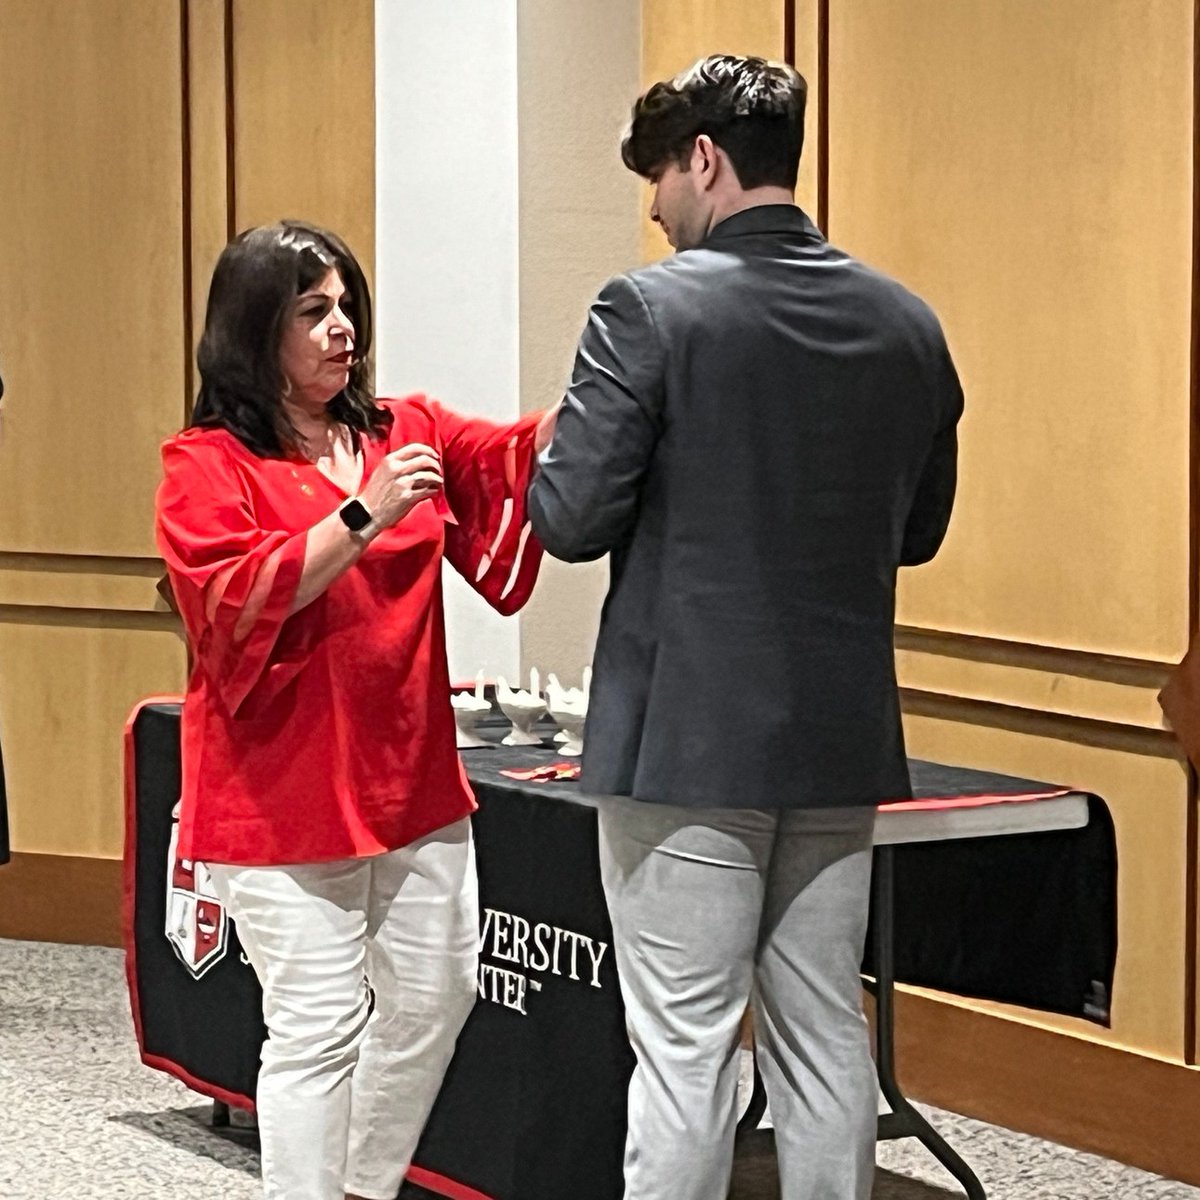 The latest class of @ttuhscson BSN graduates at the #Amarillo campus were honored with a lamp lighting ceremony hosted by BSA Health System this month. The tradition pays homage to Florence Nightingale staying up late at night checking on ailing soldiers in the hospital.